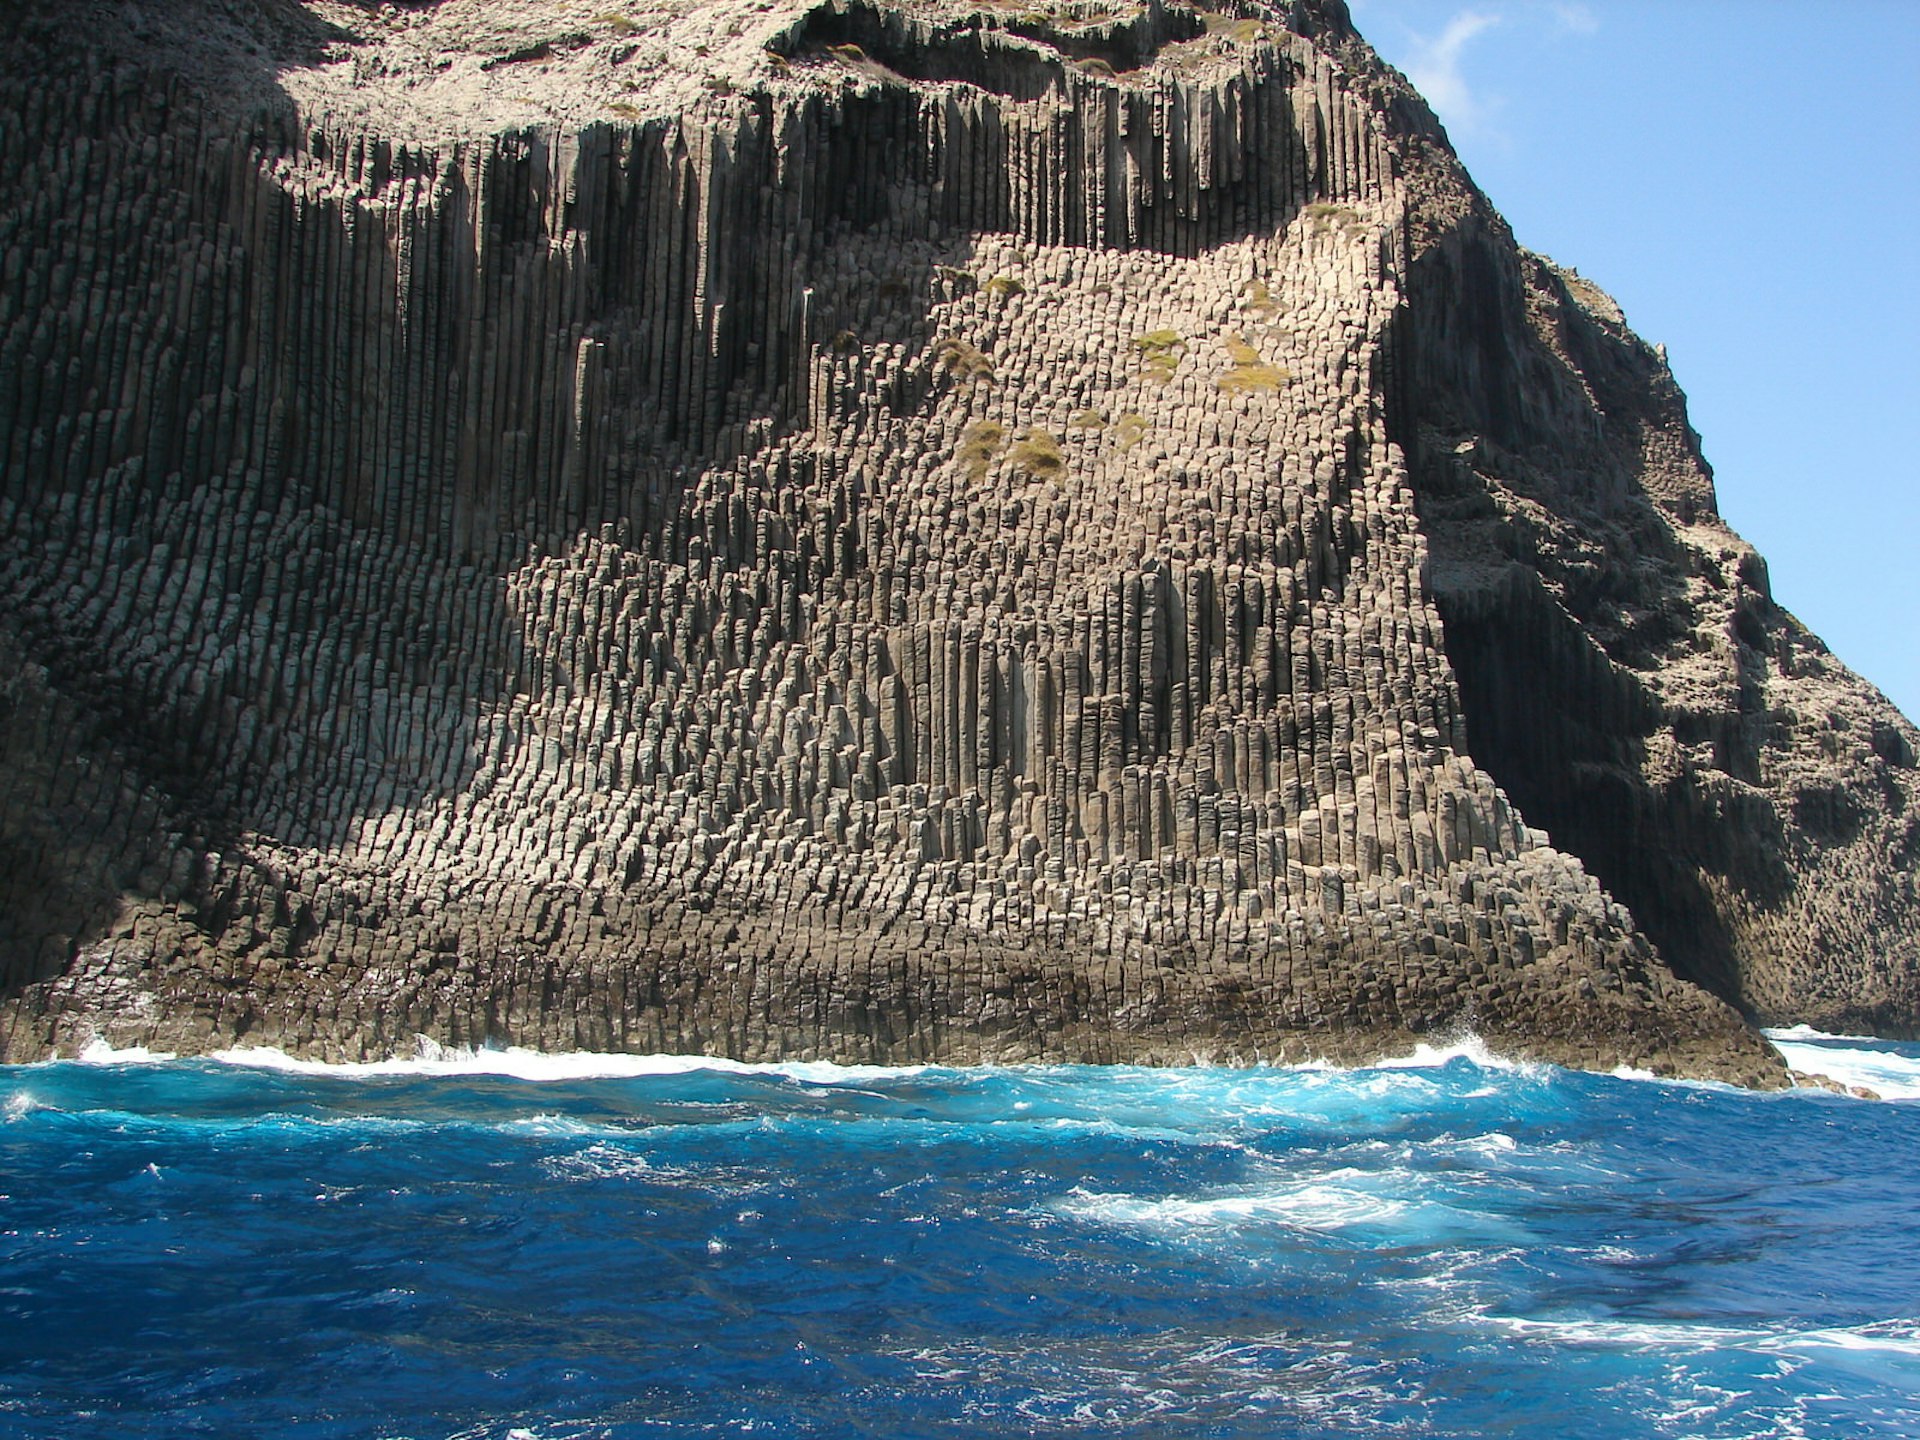 The basalt columns of Los Órganos can only be appreciated from the sea © Jens Teichmann / Shutterstock